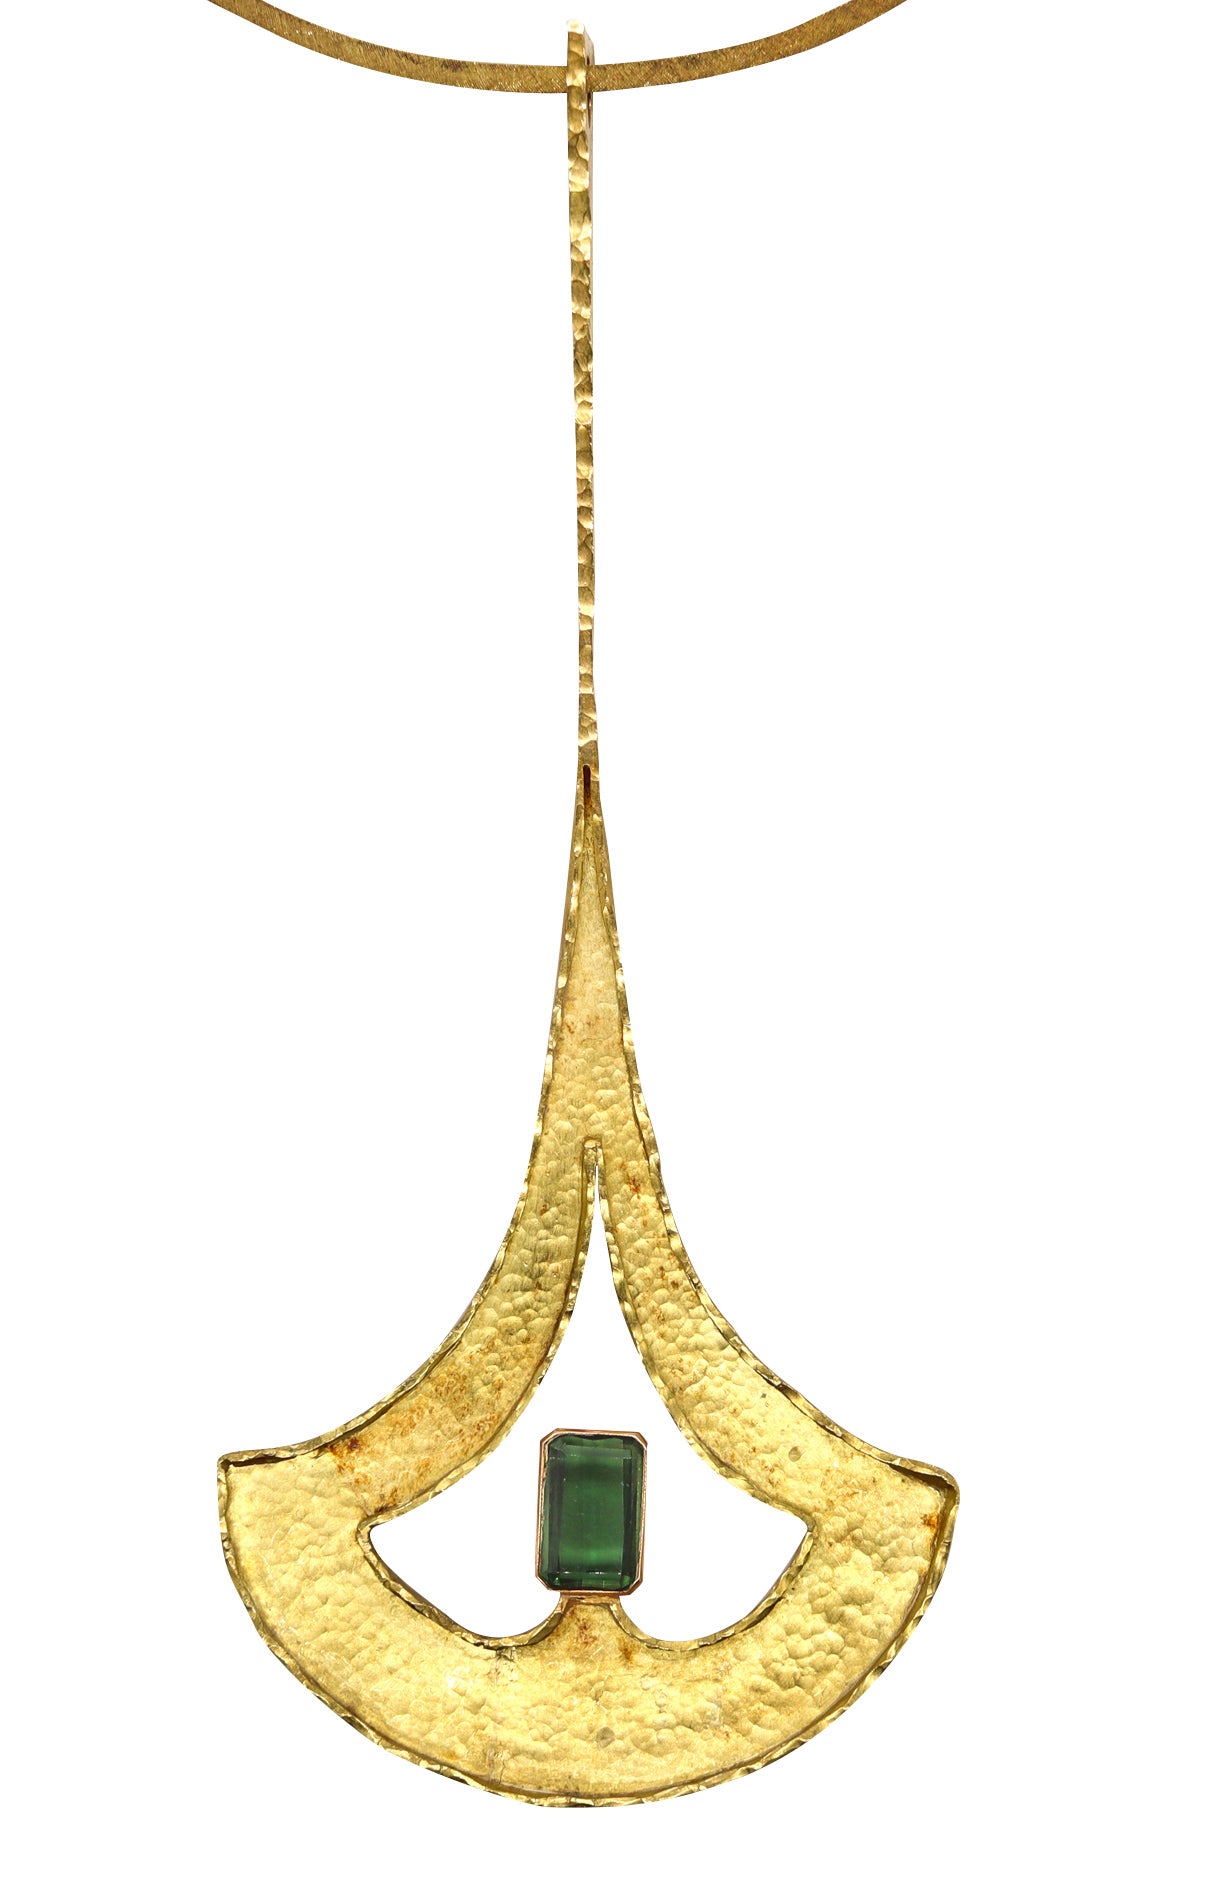 -Guayasamin Modernist 1966 Geometric Sculptural Necklace In 18Kt Gold With 8.79 Cts Green Tourmaline